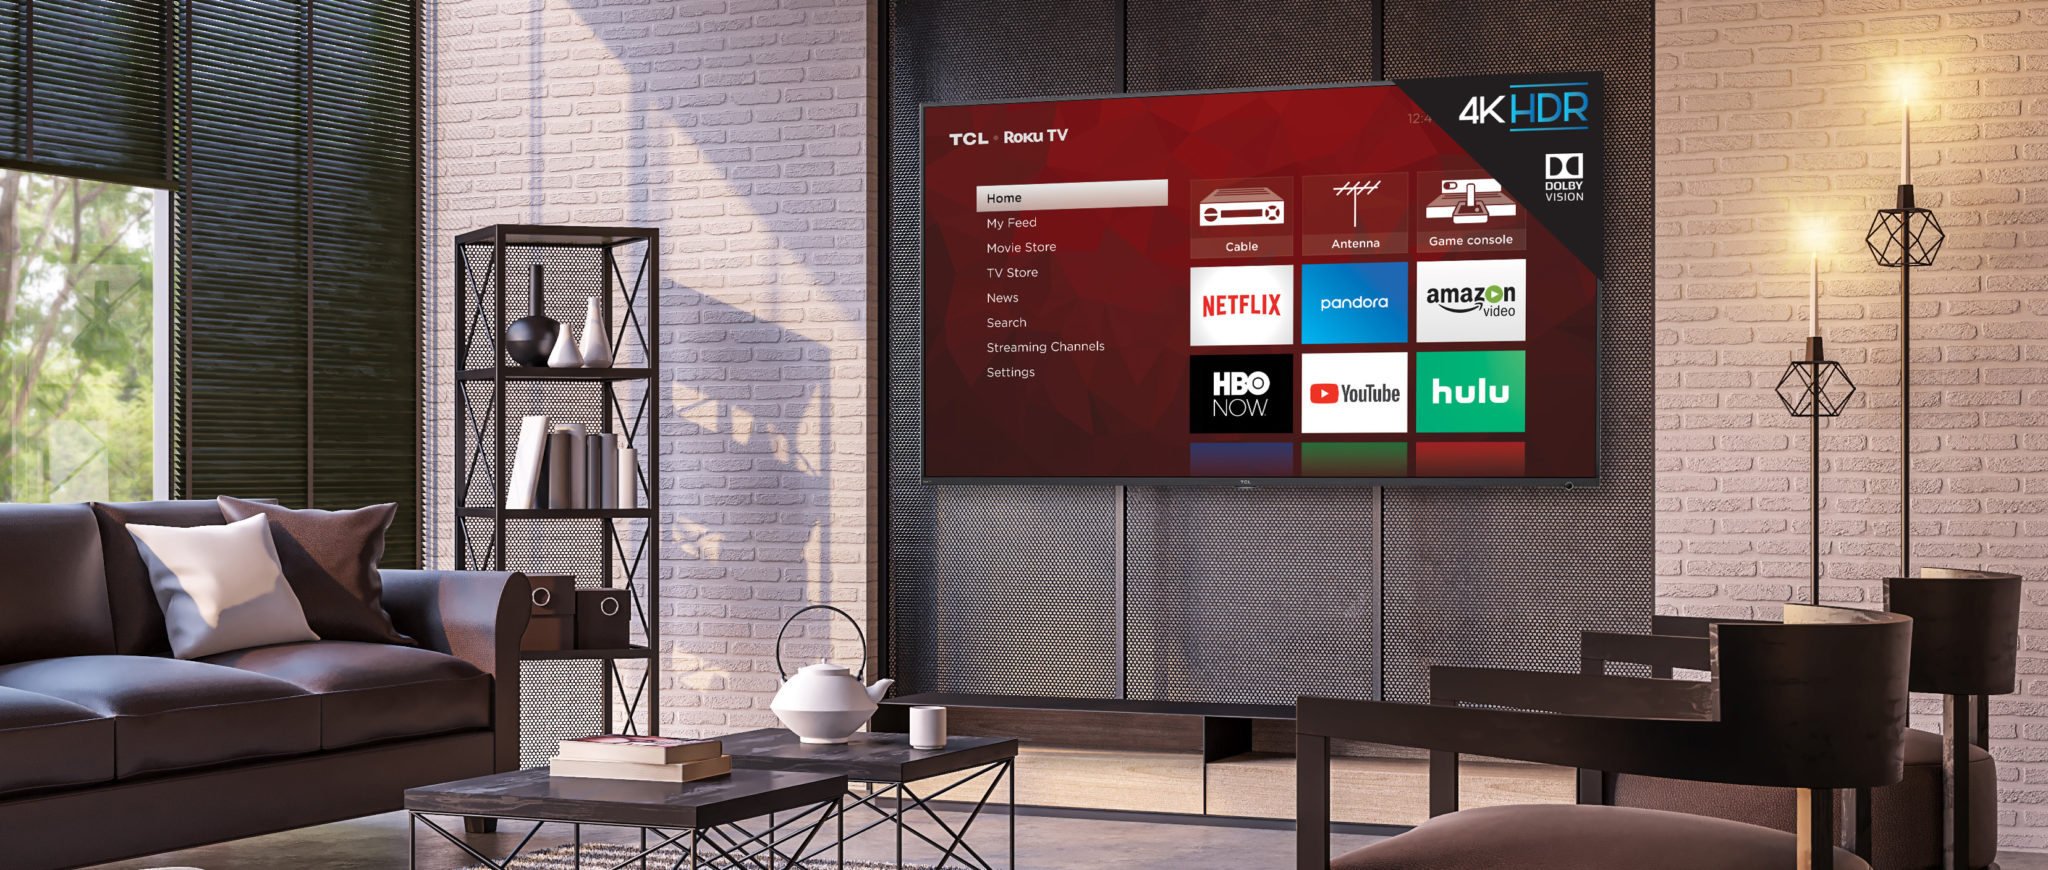 TCL Still Plans to Sell Roku TVs After Restructuring